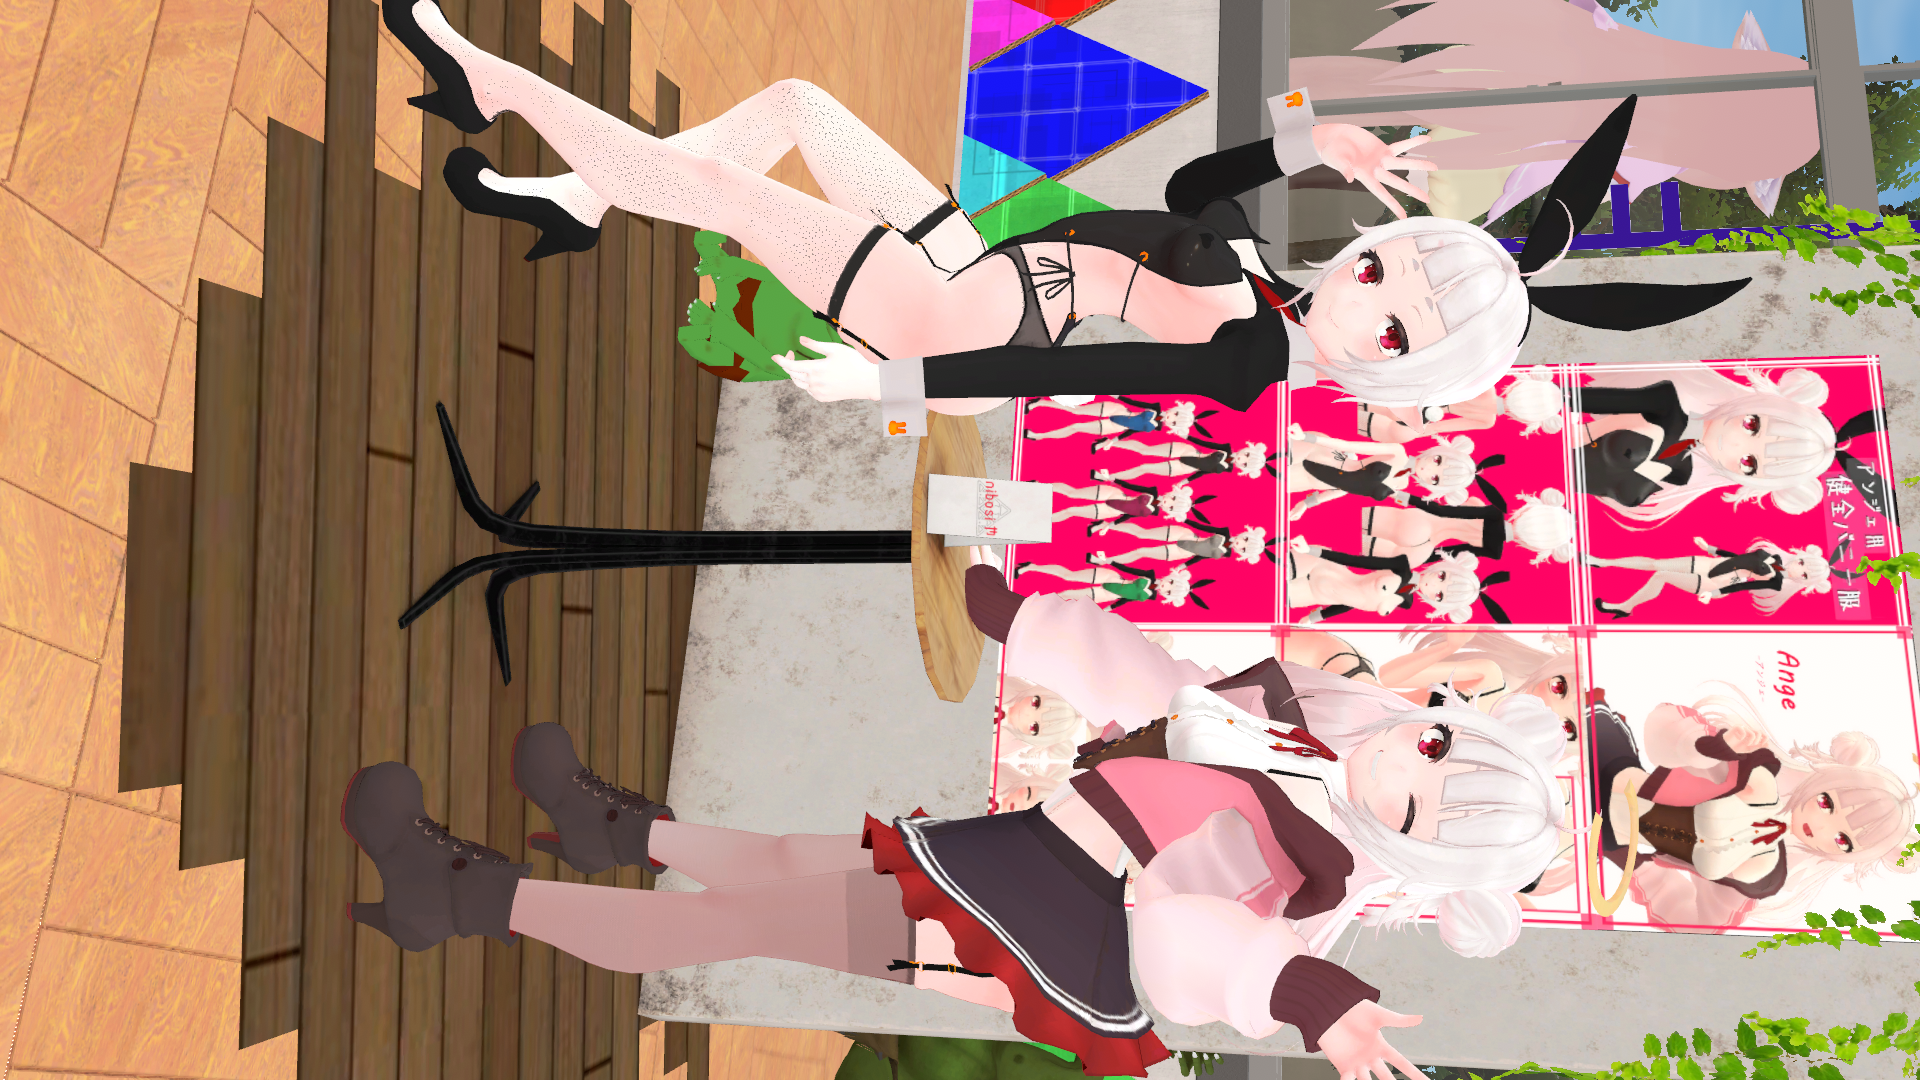 VRChat_1920x1080_2021-12-05_01-26-55.384.png